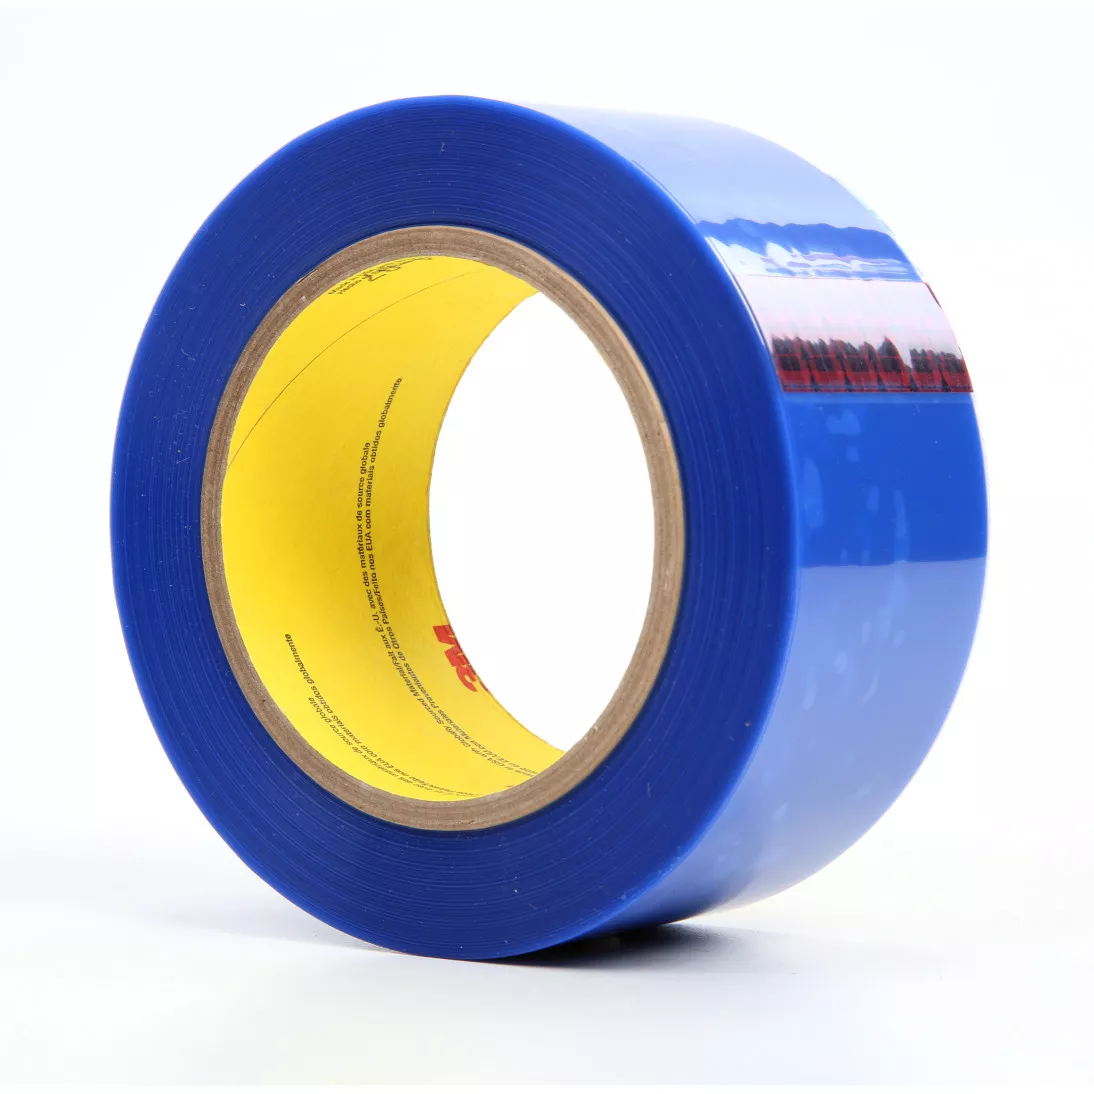 3M™ Polyester Tape 8902, Blue, 2 in x 72 yd, 3.4 mil, 24 rolls per case